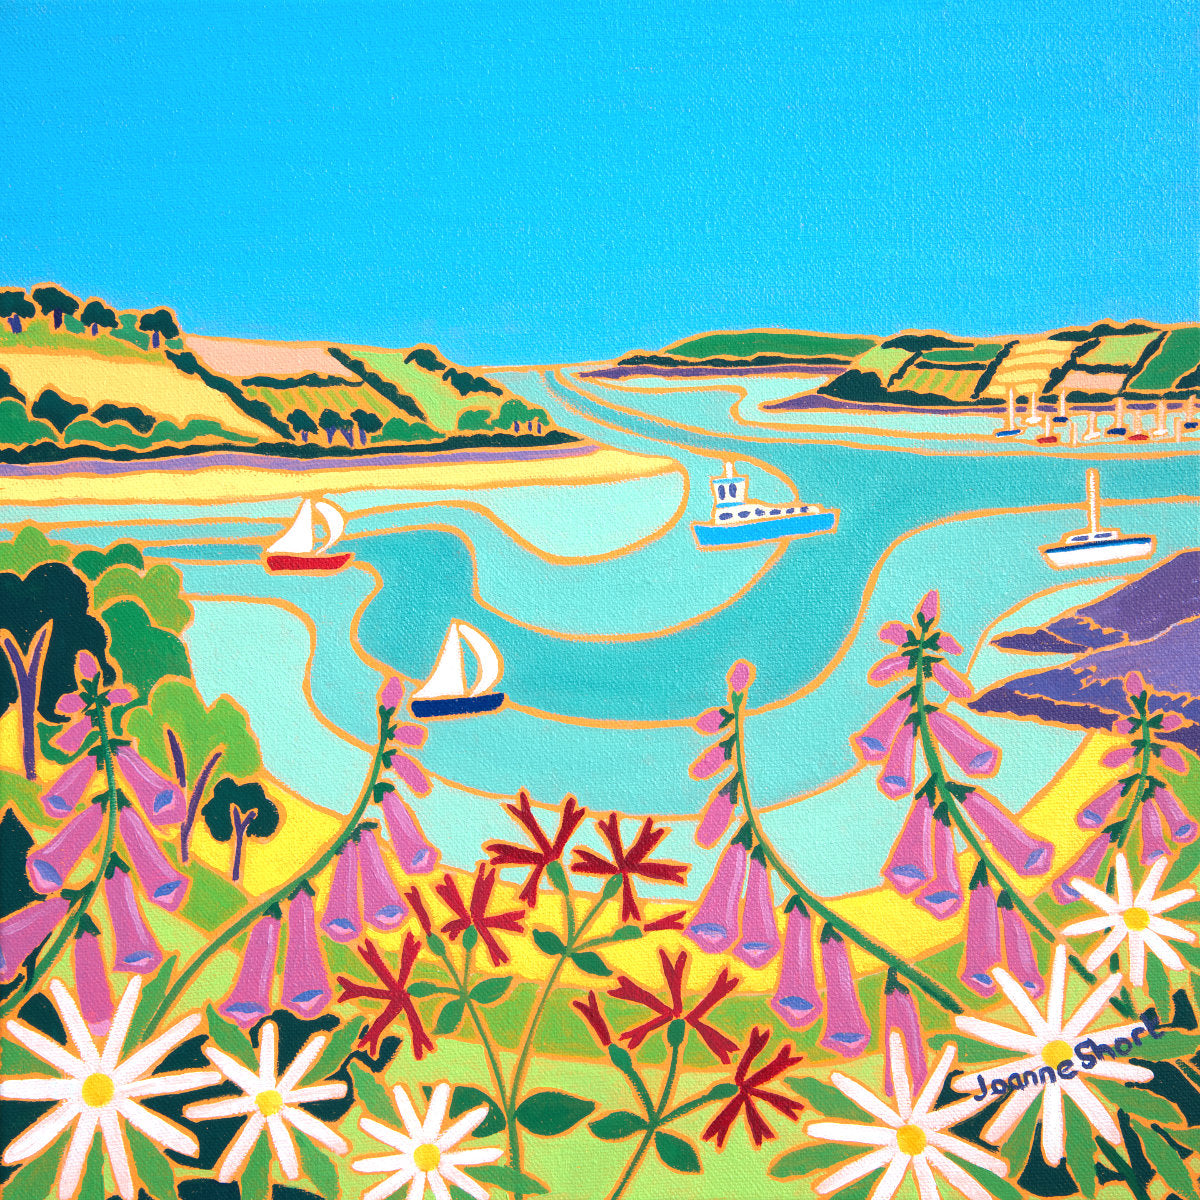 Cornwall Art Gallery Painting by Joanne Short. &#39;View of the Carrick Roads from Trelissick&#39;. 12 x 12 inches oil on canvas.